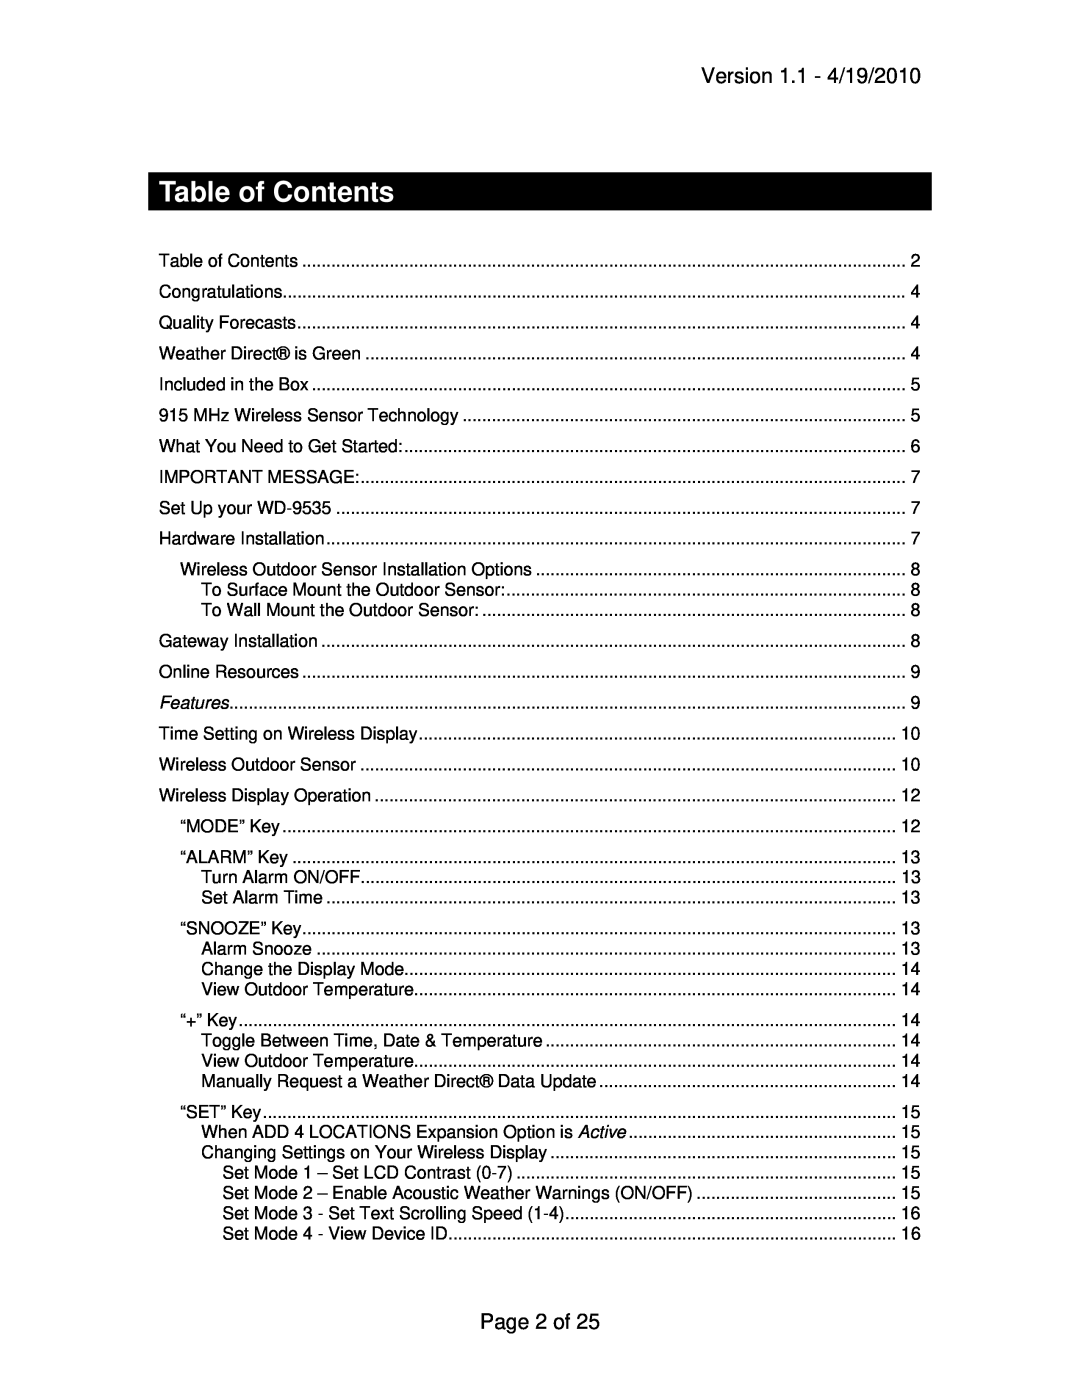 La Crosse Technology WD-9535 owner manual Table of Contents, Version 1.1 - 4/19/2010, Page 2 of 